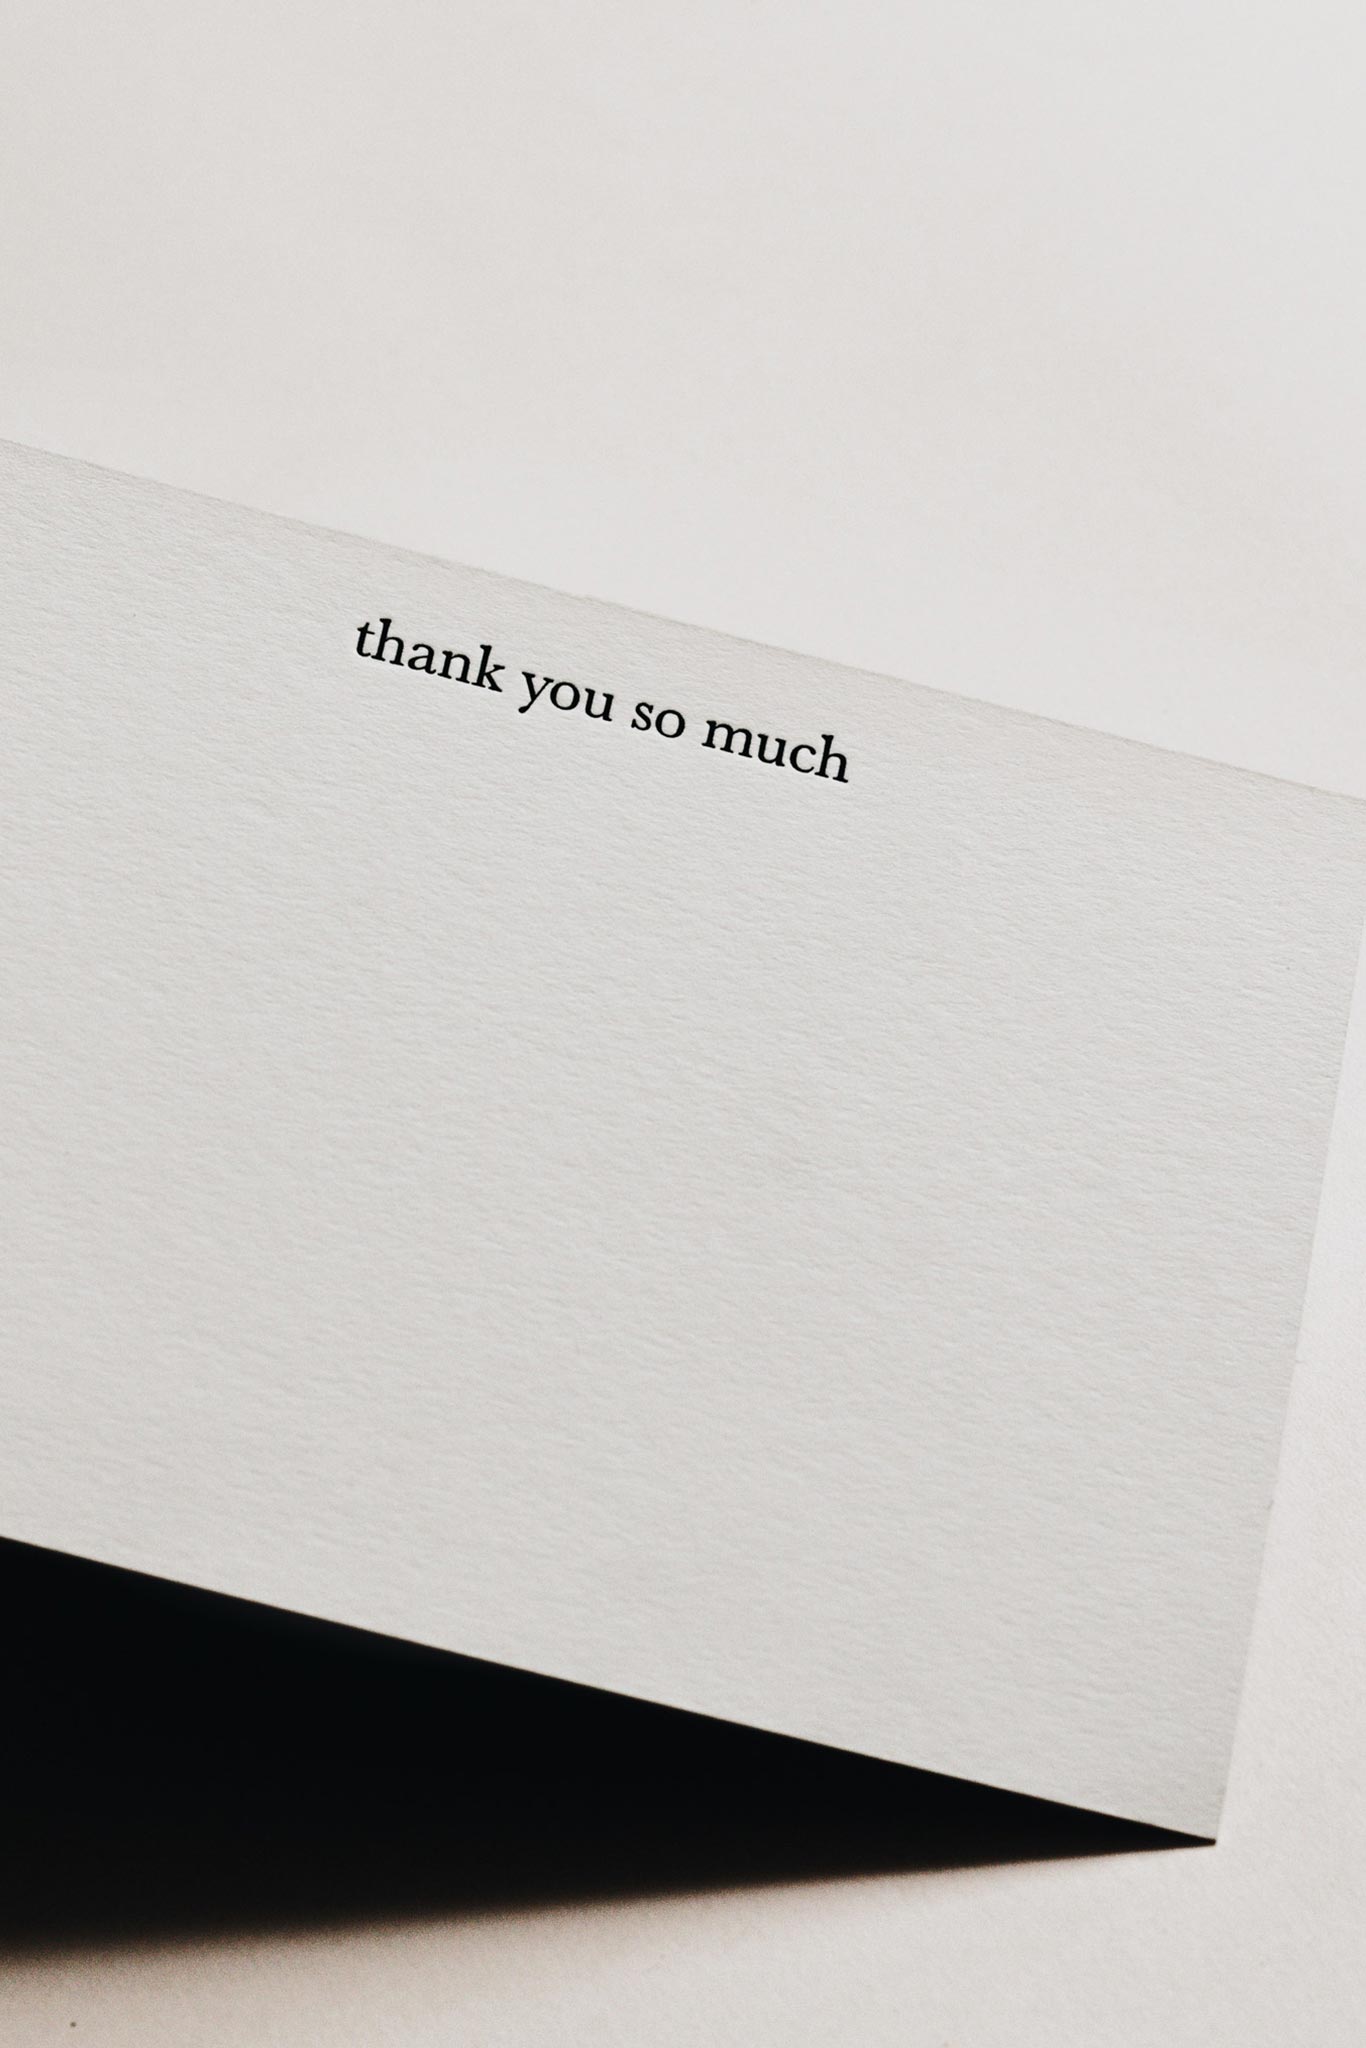 Notecards - Thank You So Much, Letterpress